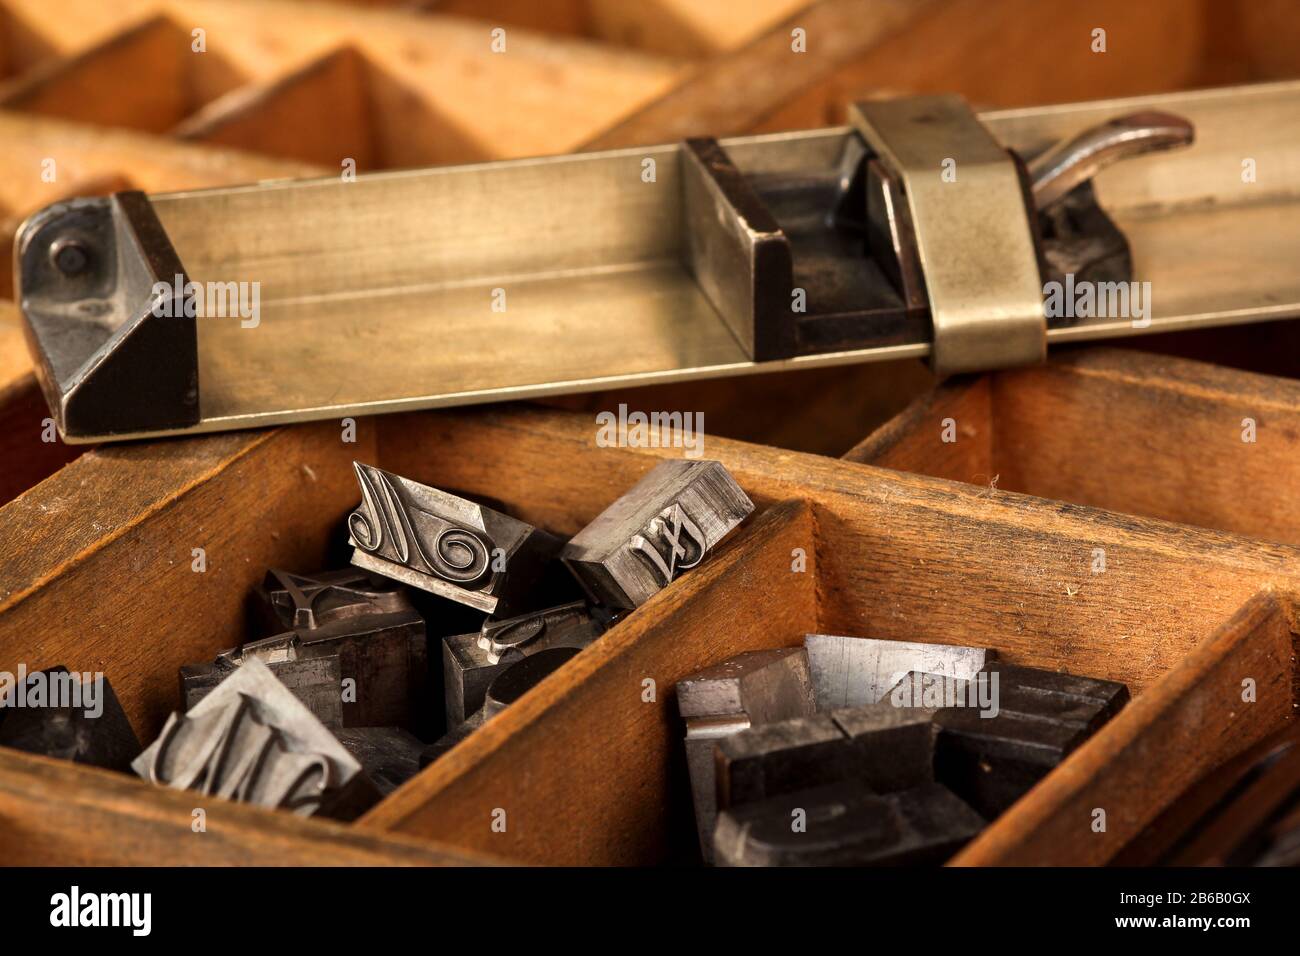 Composing stick on letter case Stock Photo